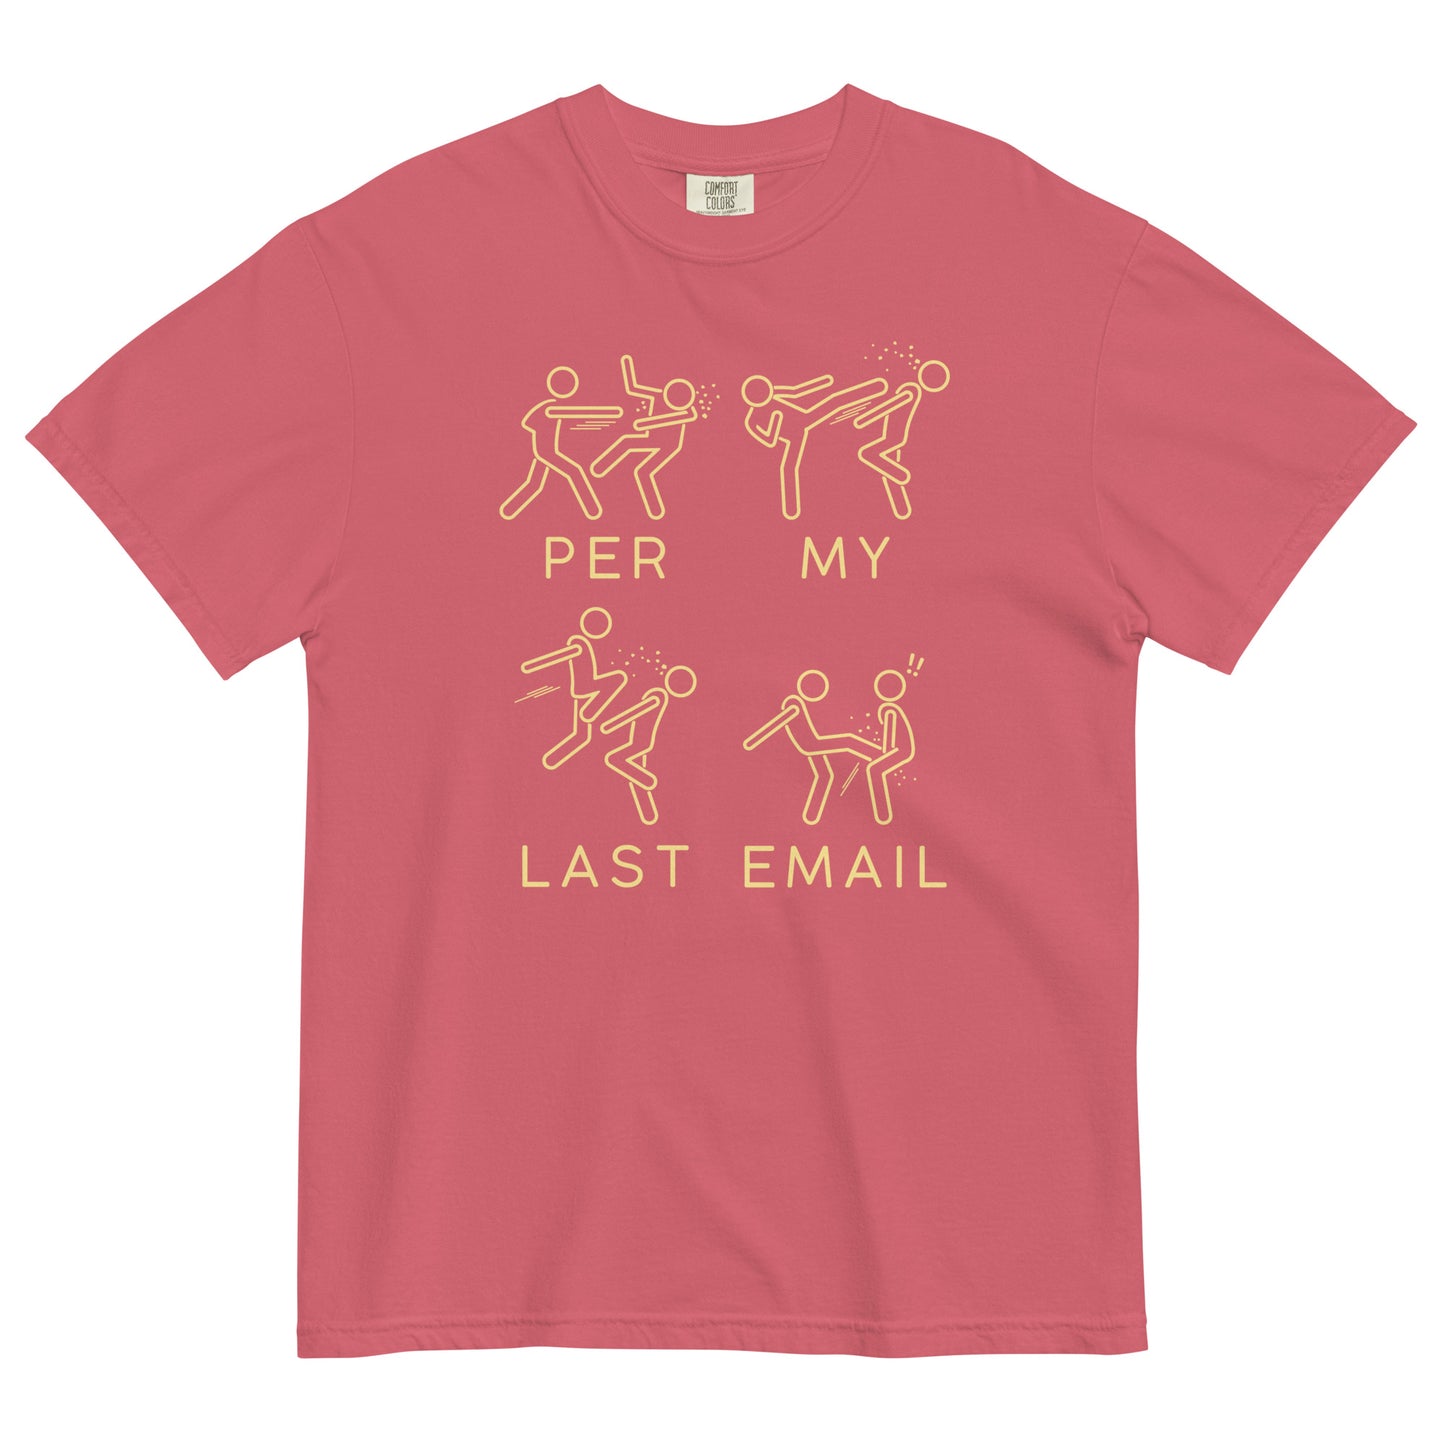 Per My Last Email Men's Relaxed Fit Tee